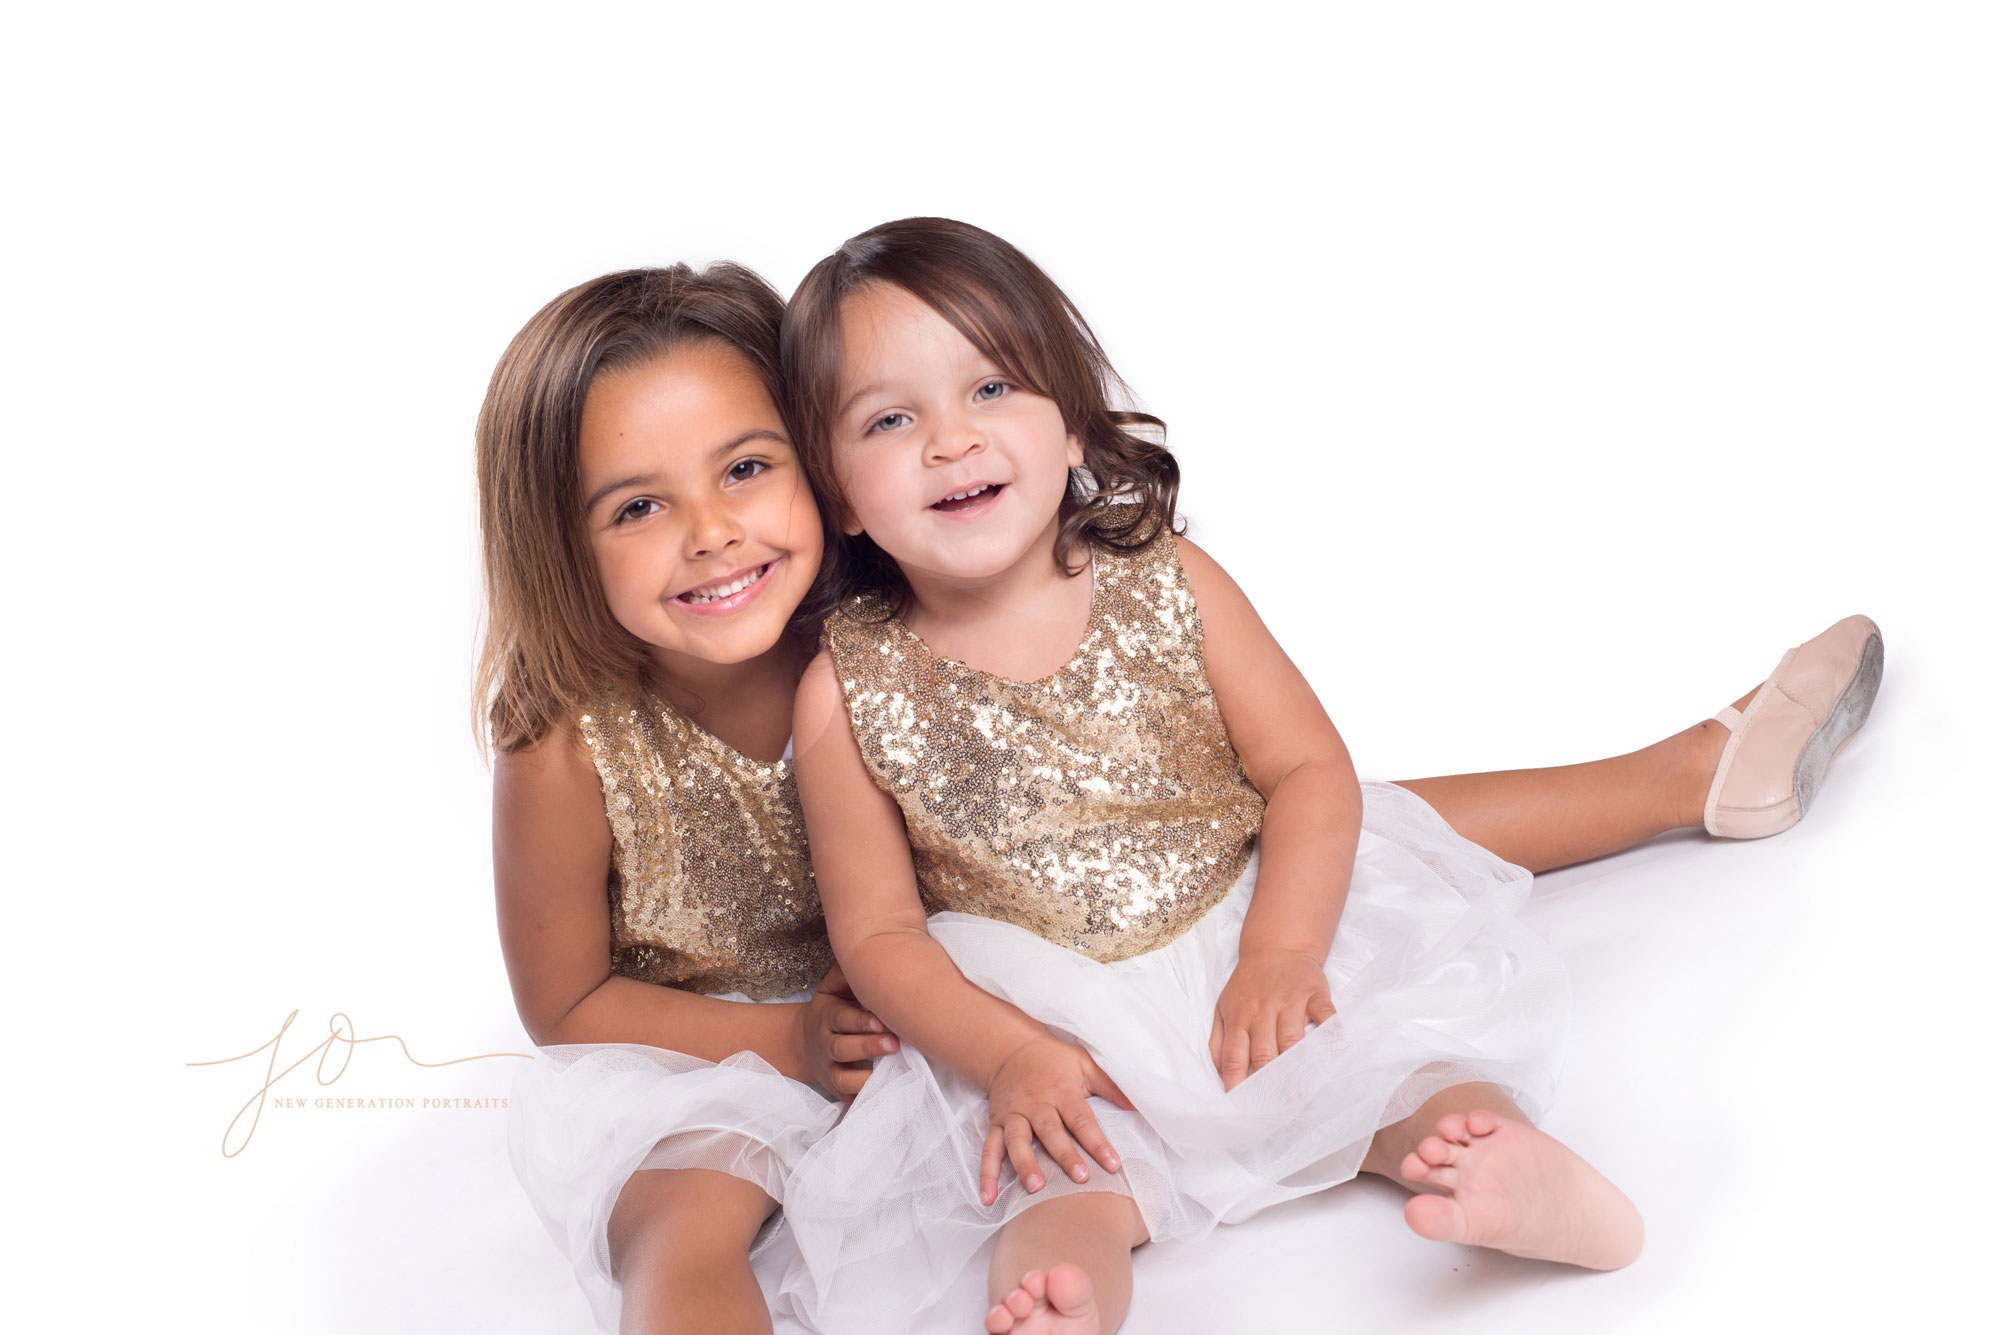 Sisters Laughing at the photographer at their family portrait shoot captured by New Generation Portraits.